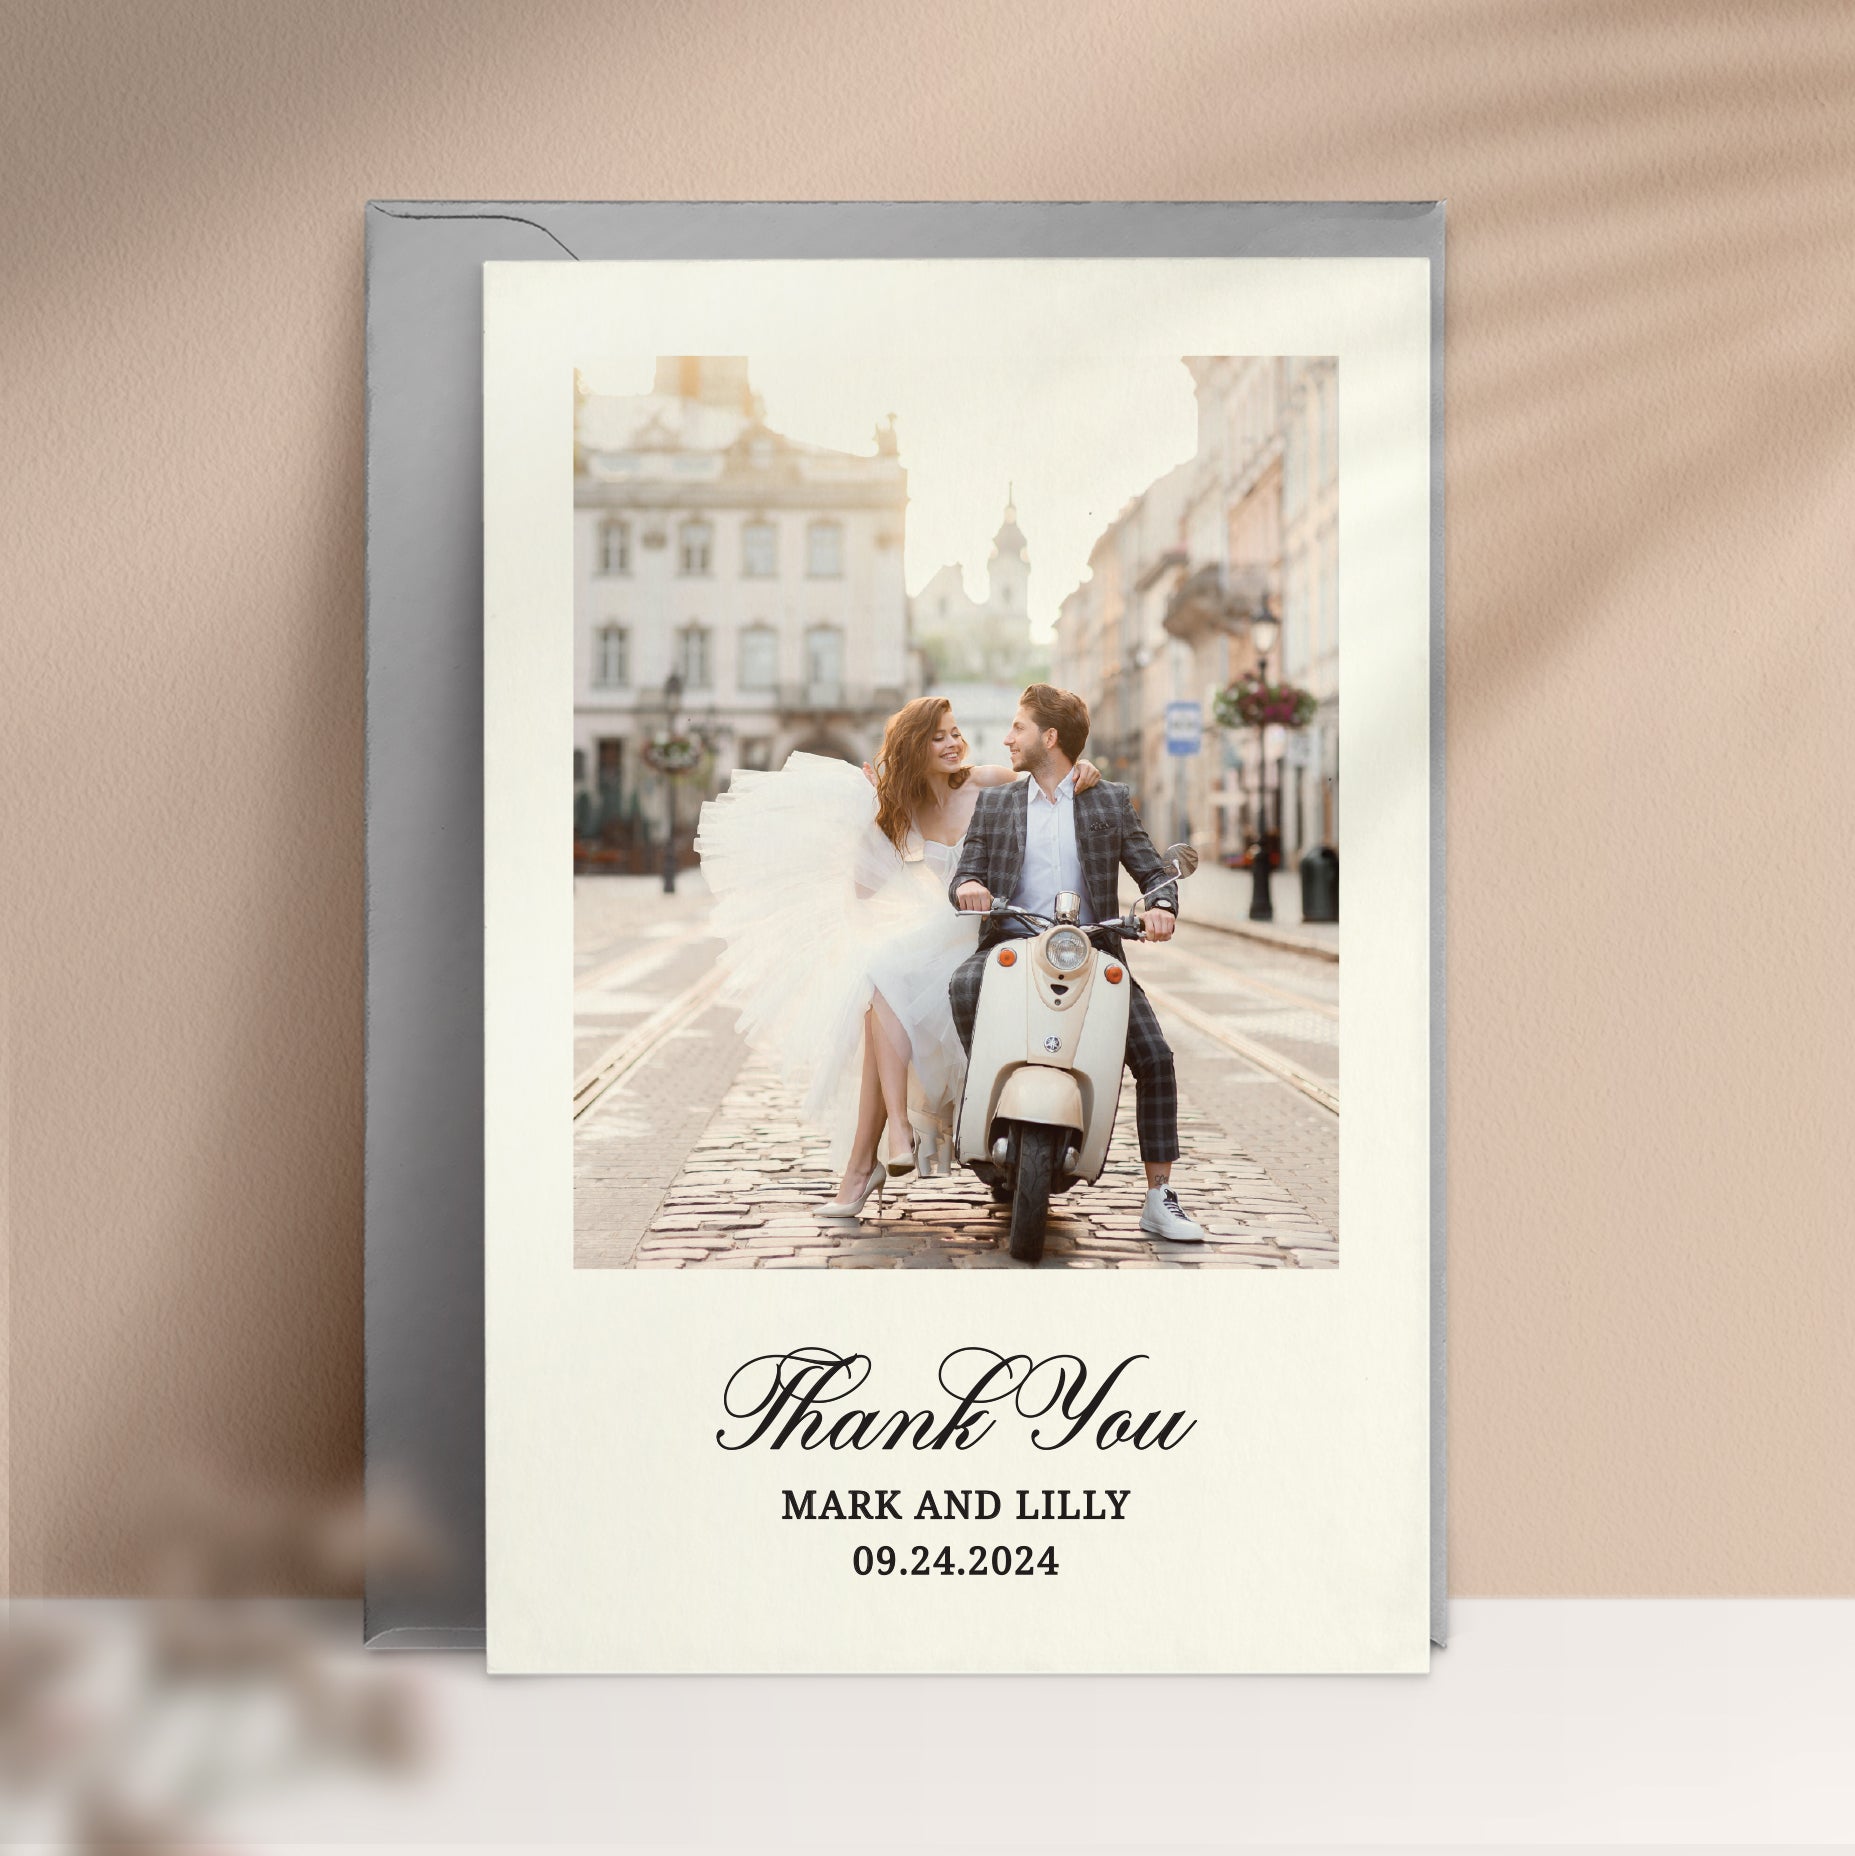 personalized wedding thank you note cards with custom photo, names and wedding date featuring a timeless calligraphy font - XOXOKristen